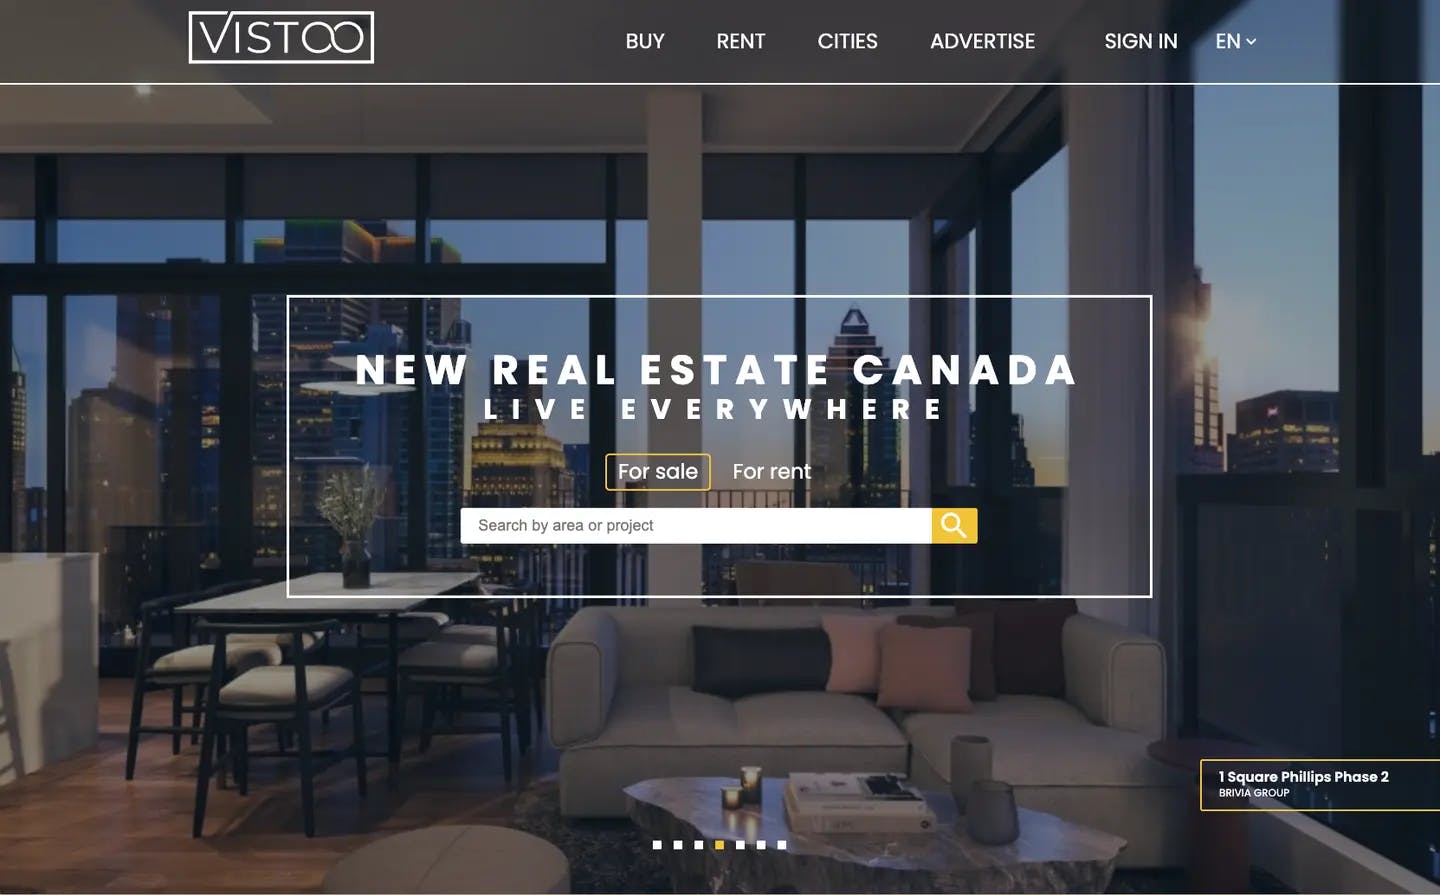 Redefining the Real Estate Experience: Vistoo, the Multiservice Platform